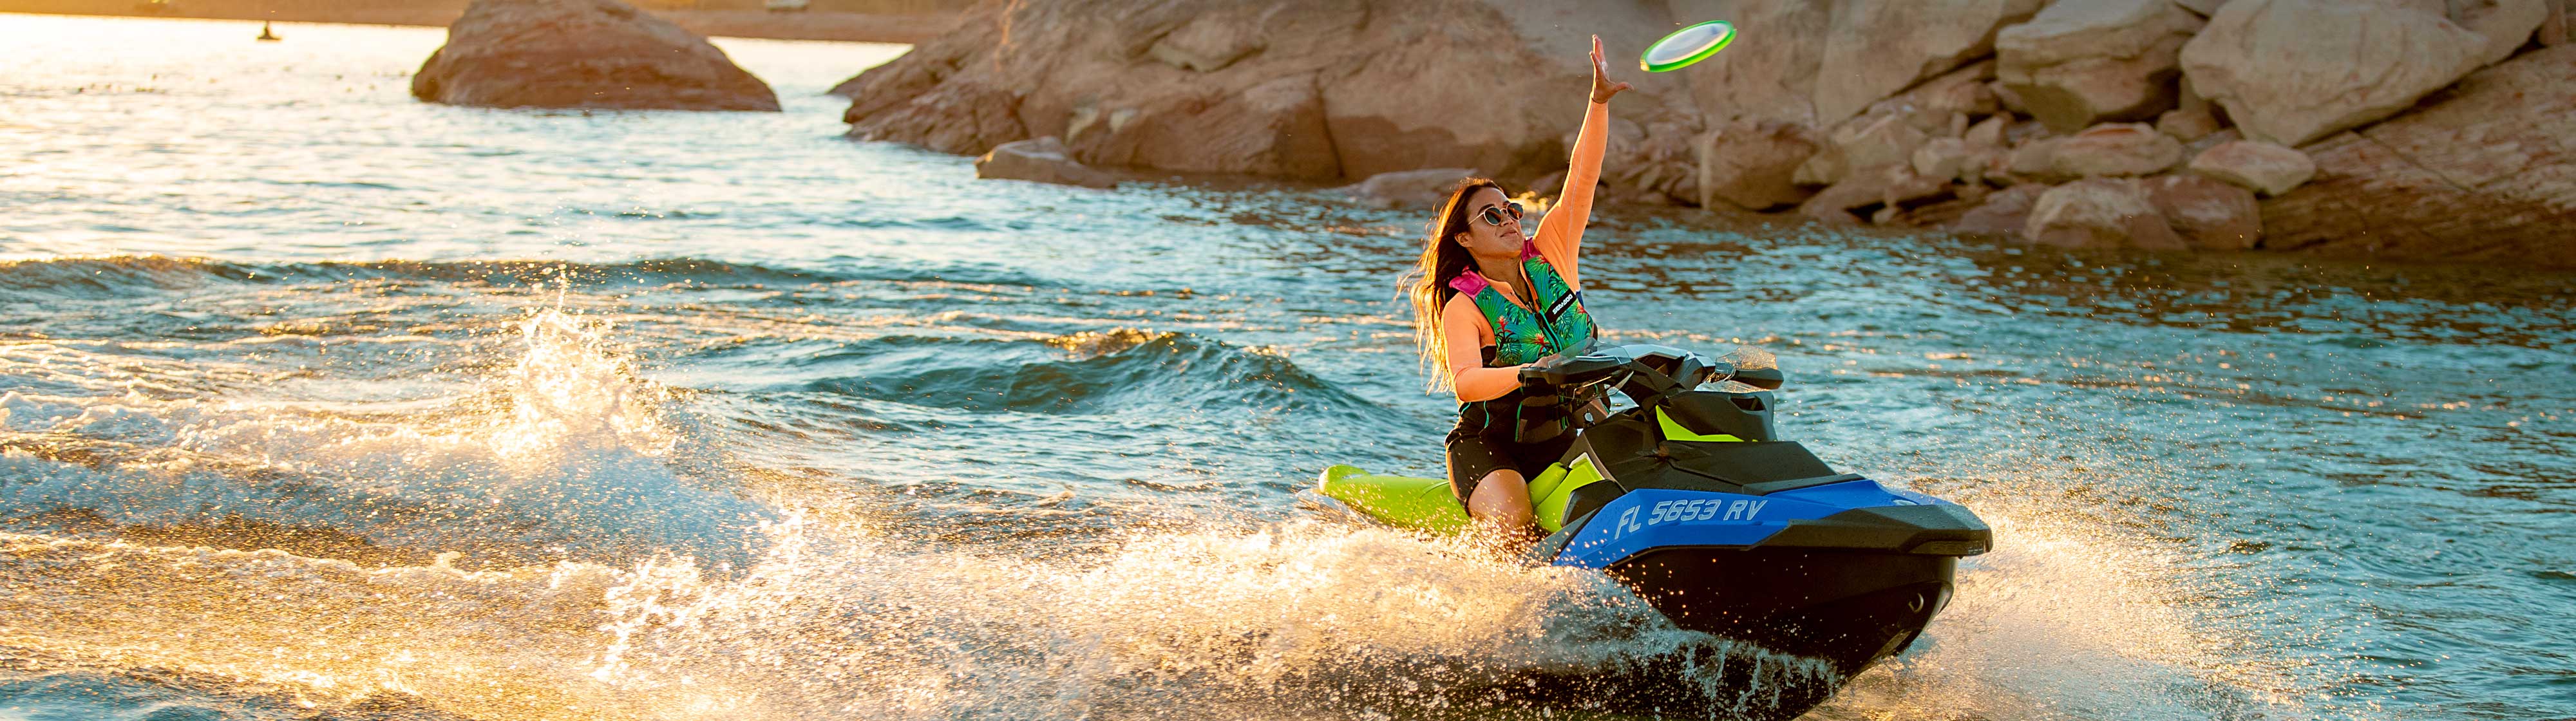 Women driving a Sea-Doo SPARK while catching a Frisbee